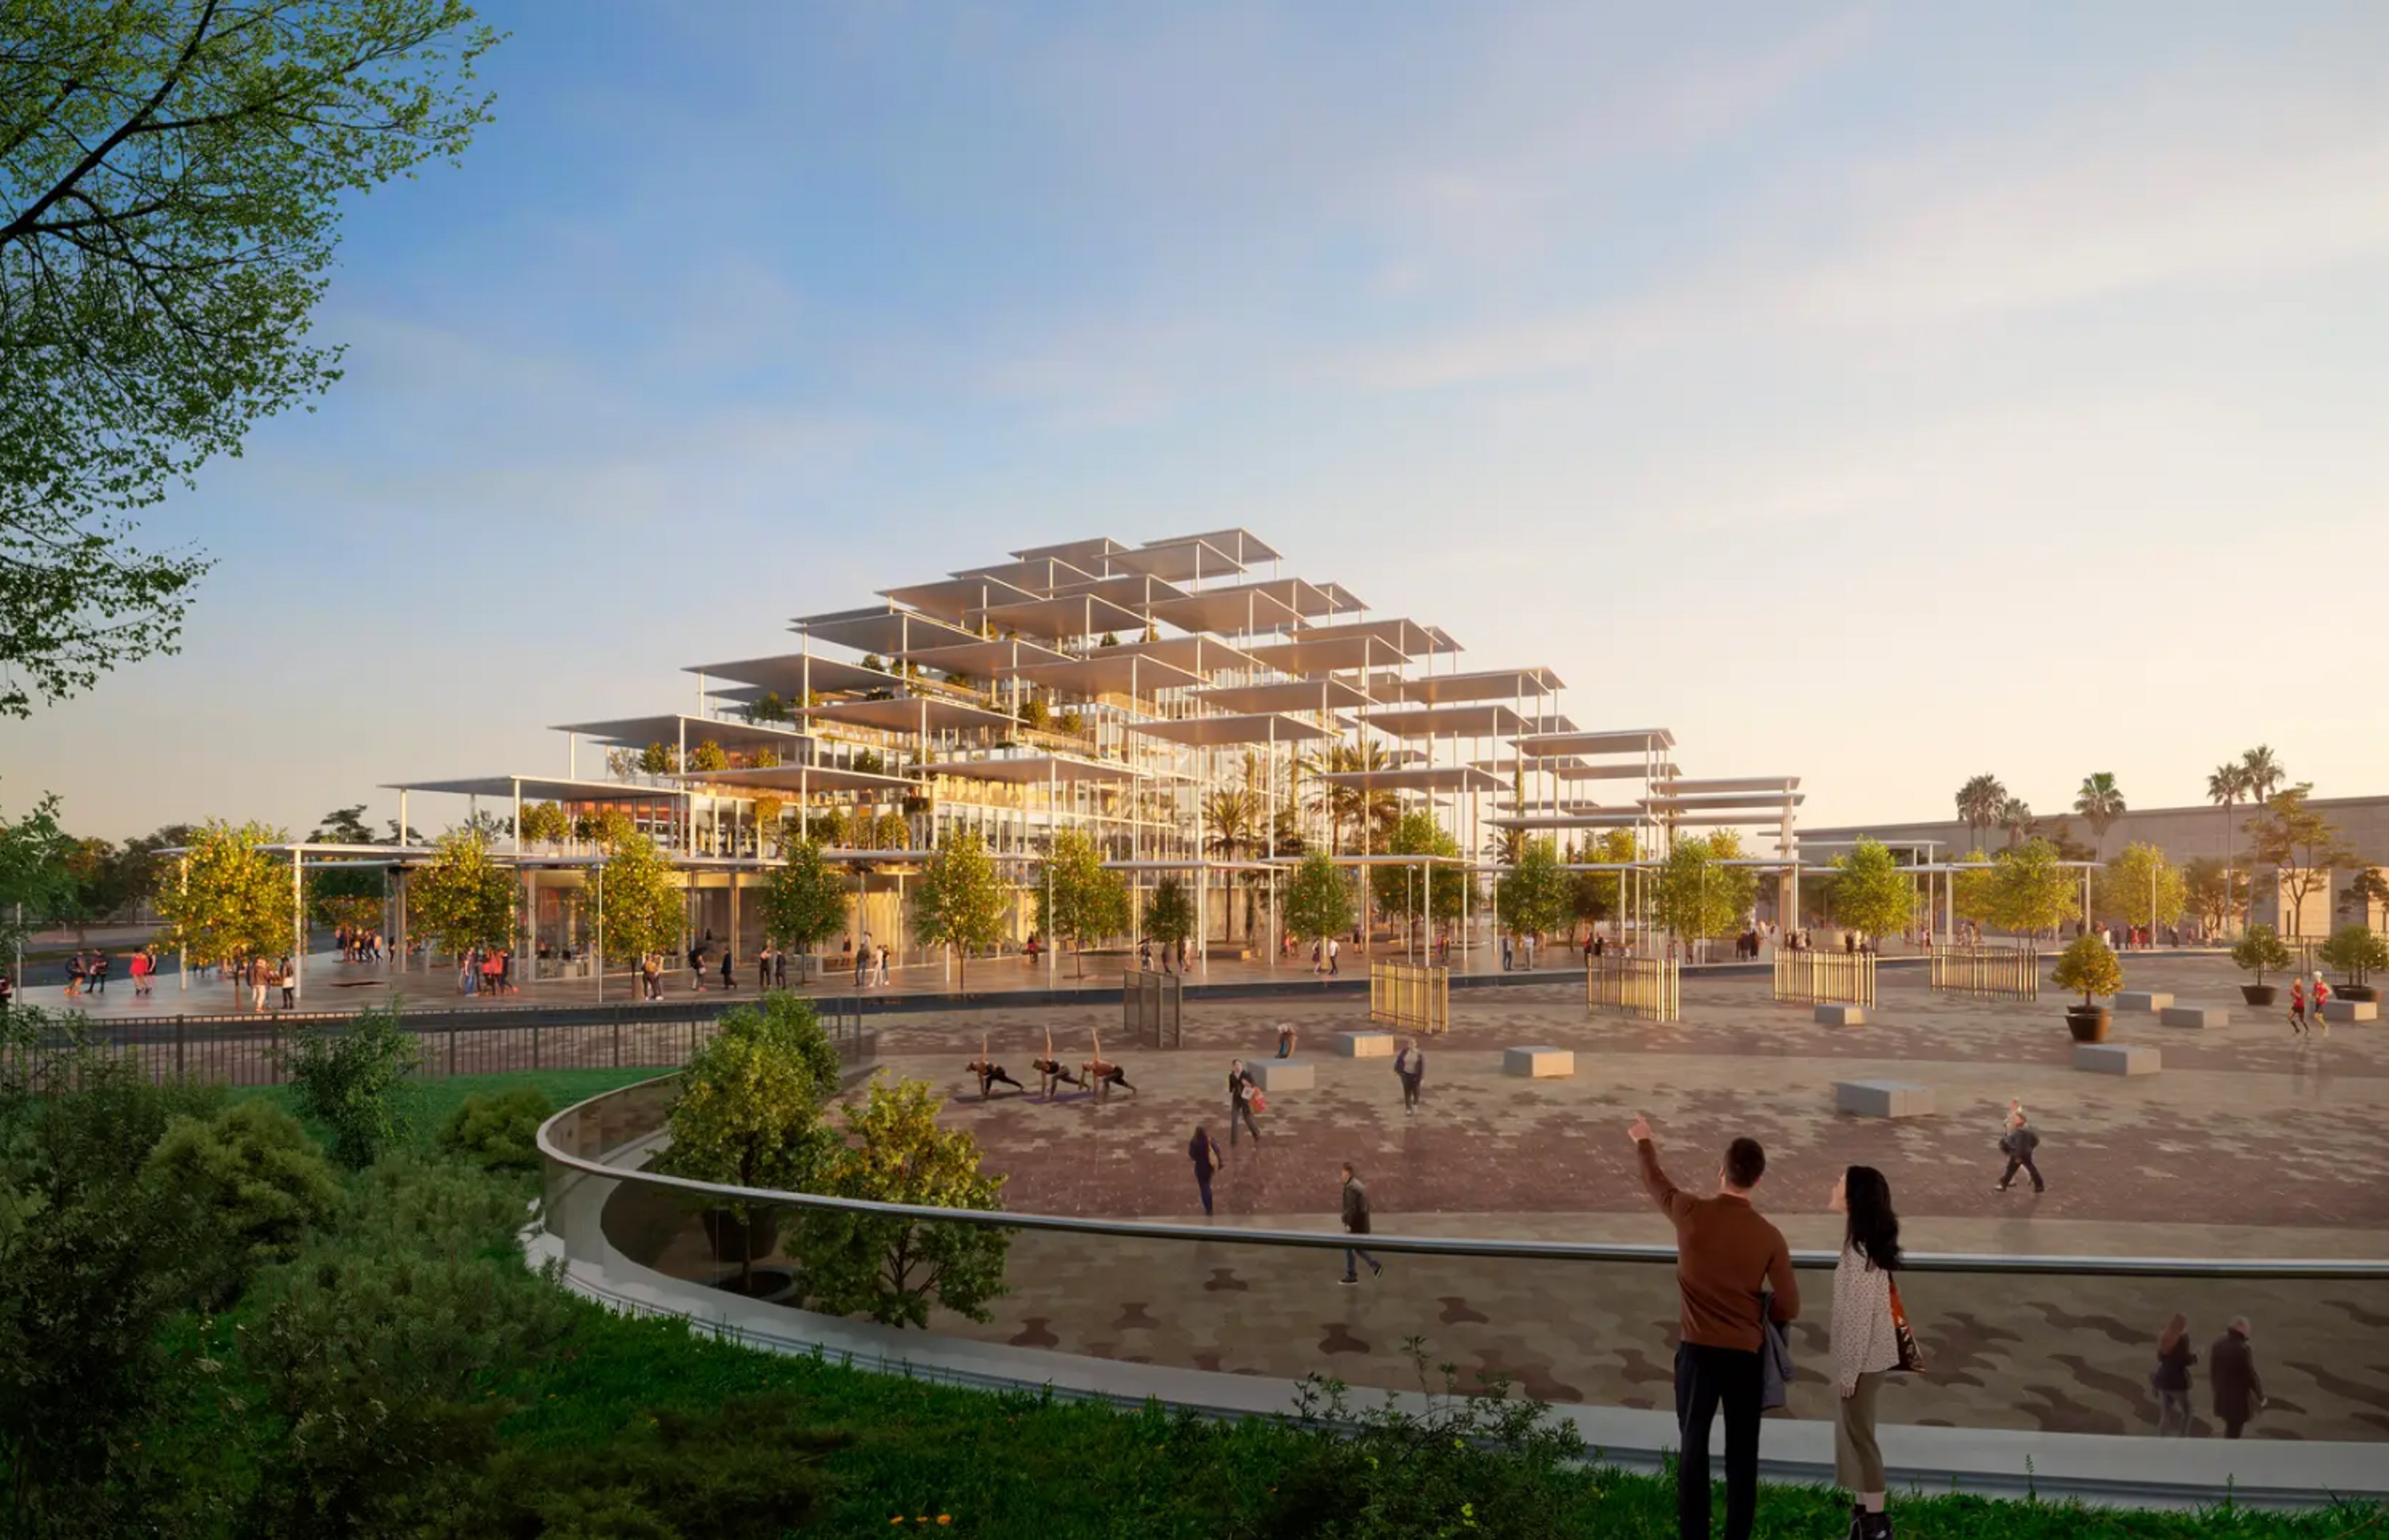 SUSTAINABILITY DRIVES DESIGN FOR RESEARCH CENTRE IN SEVILLE